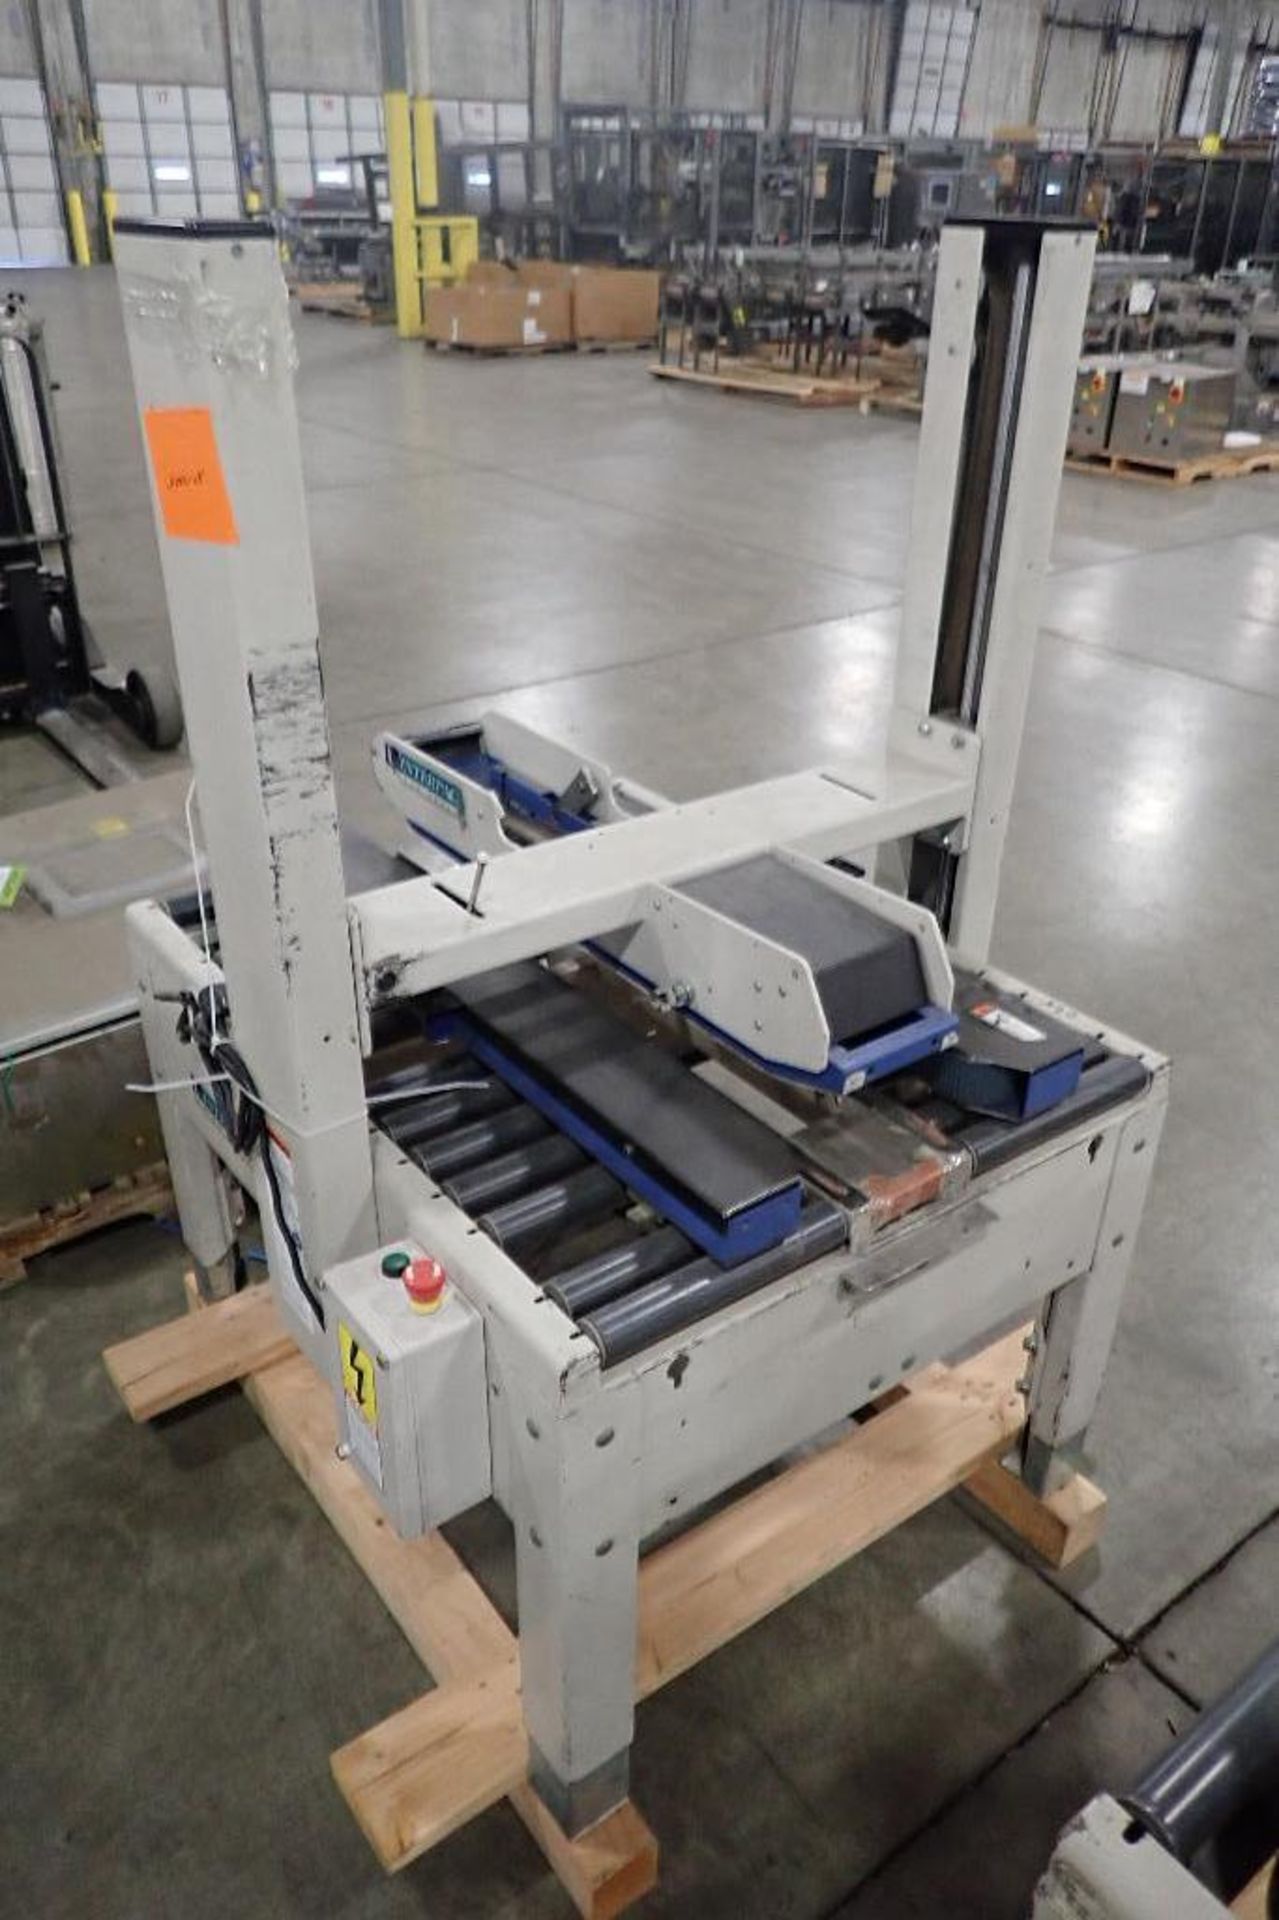 Interpack adjustable case sealer, Model USA2024SB, missing heads. **Rigging Fee: $50** (Located in 3 - Image 7 of 8